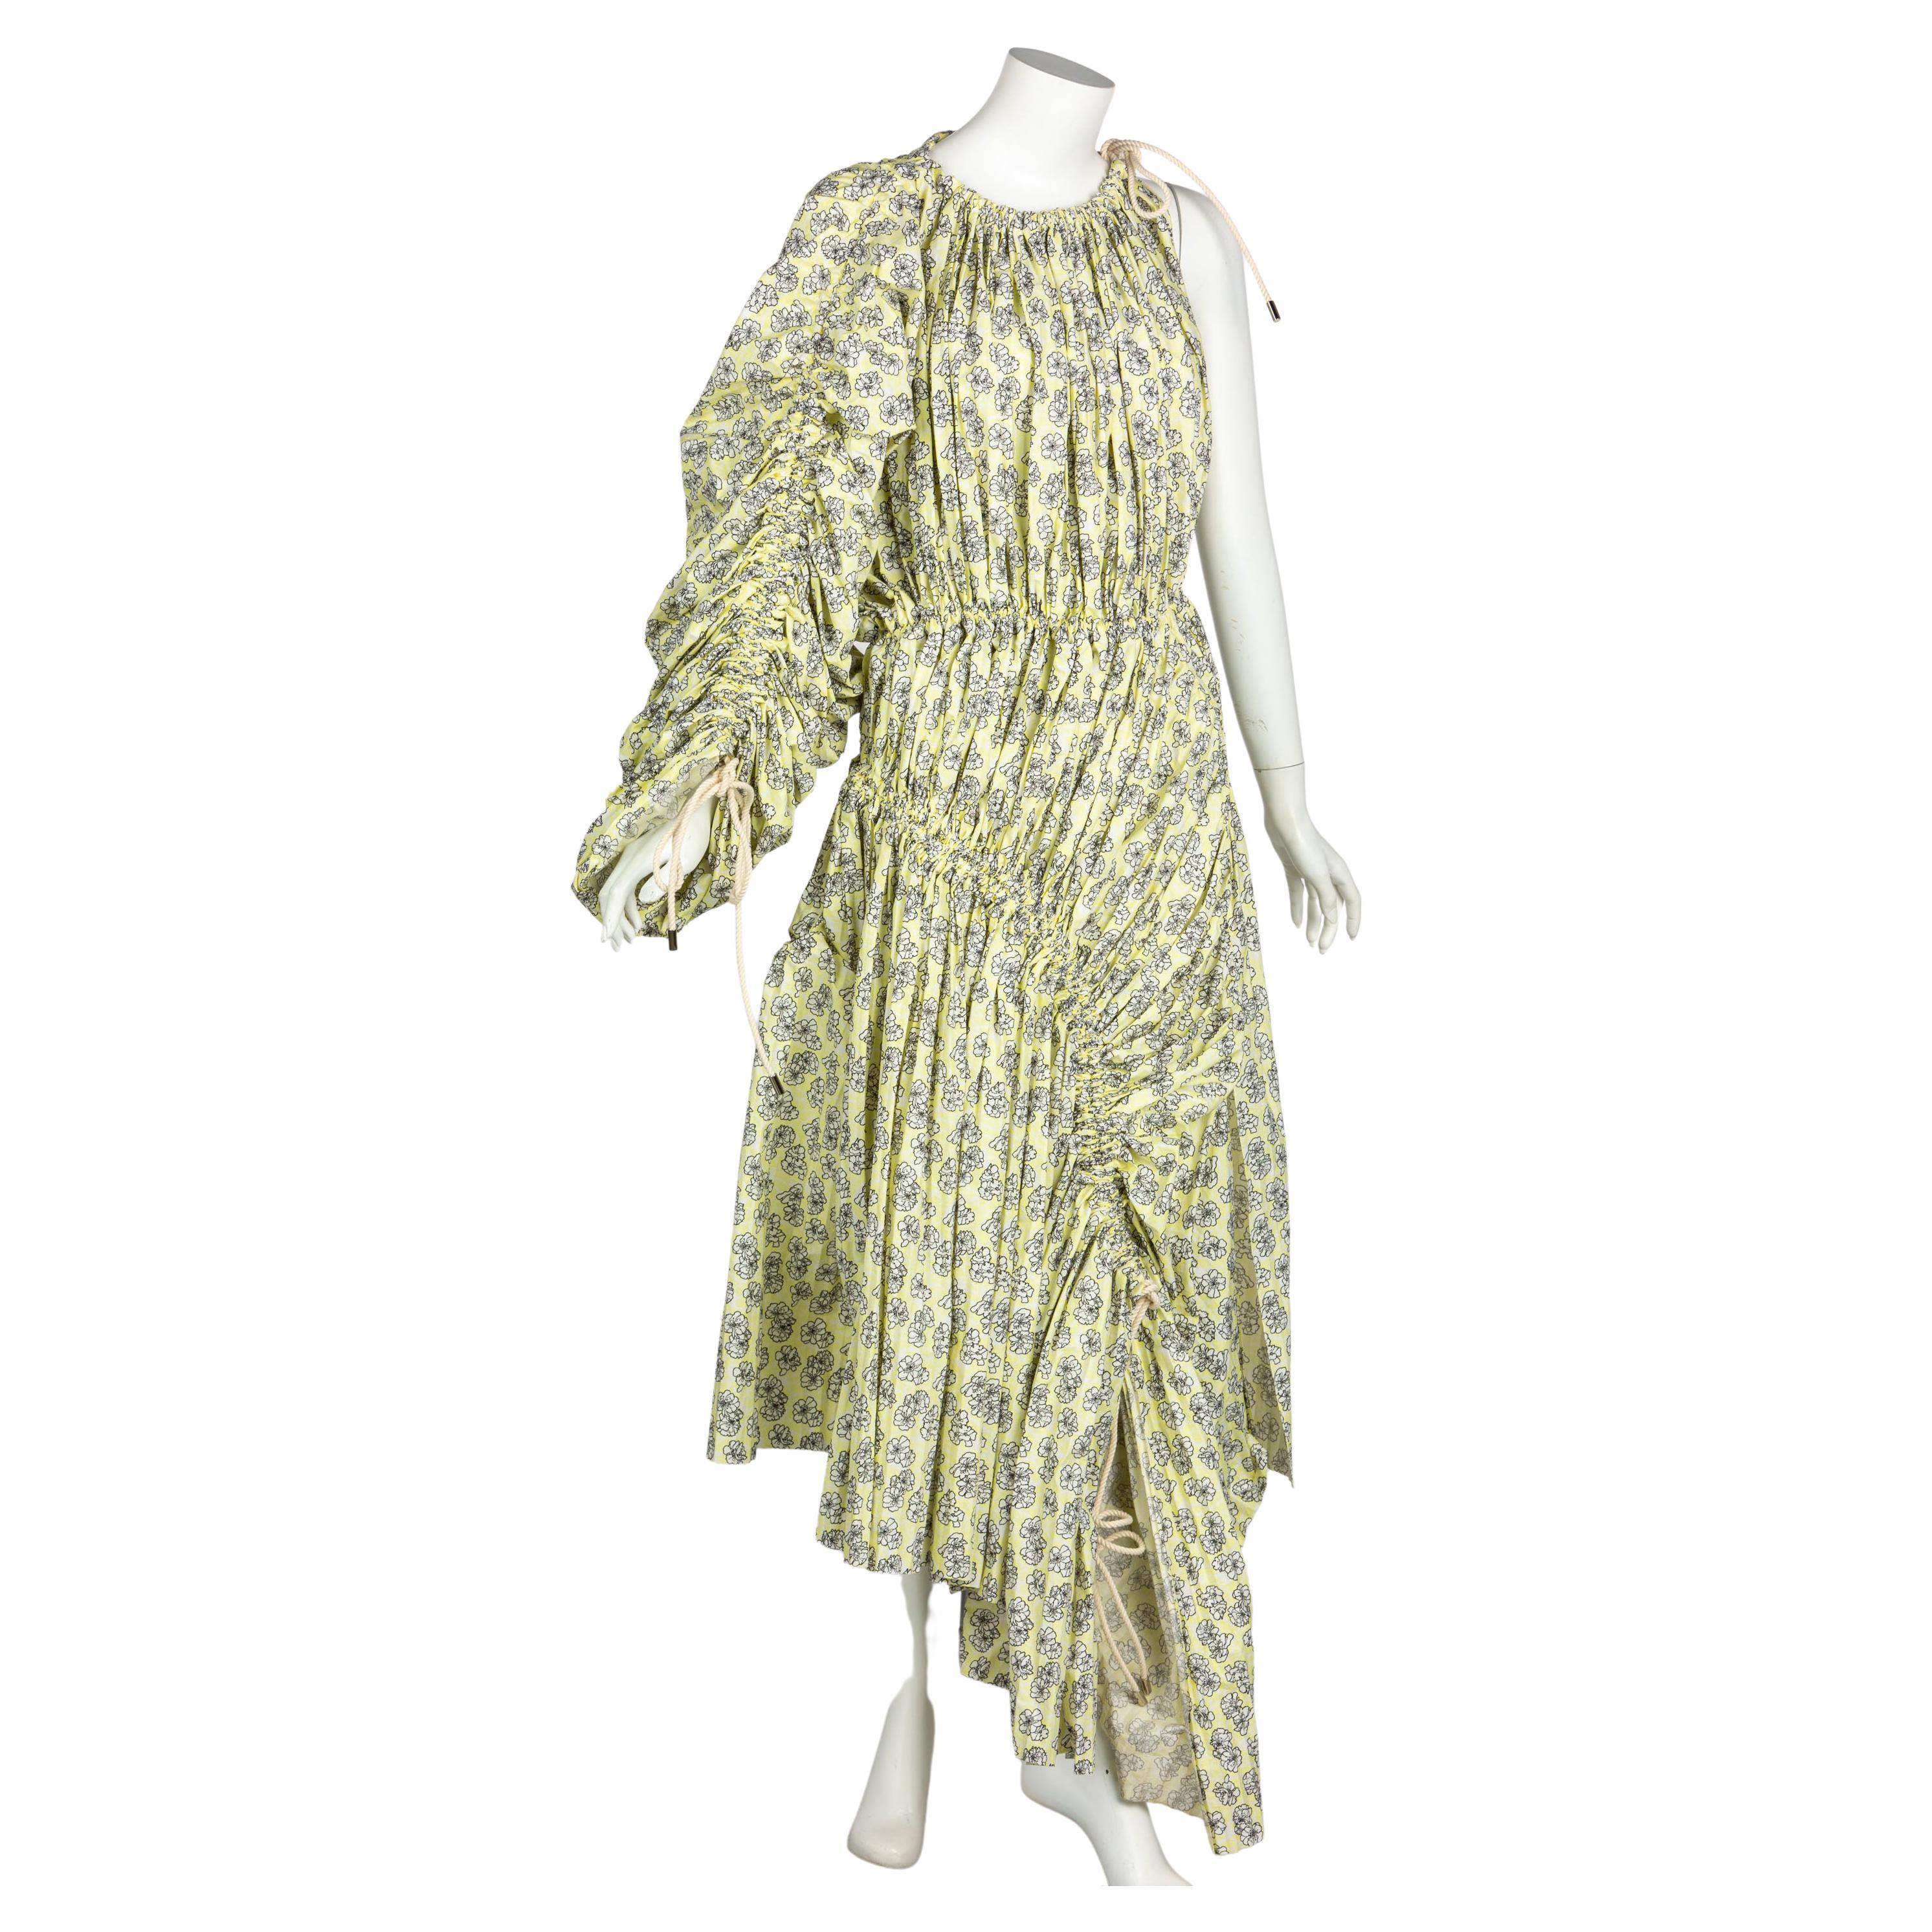 Marni Yellow Floral Cotton Ruched Dress Spring 2017 New W Tags For Sale